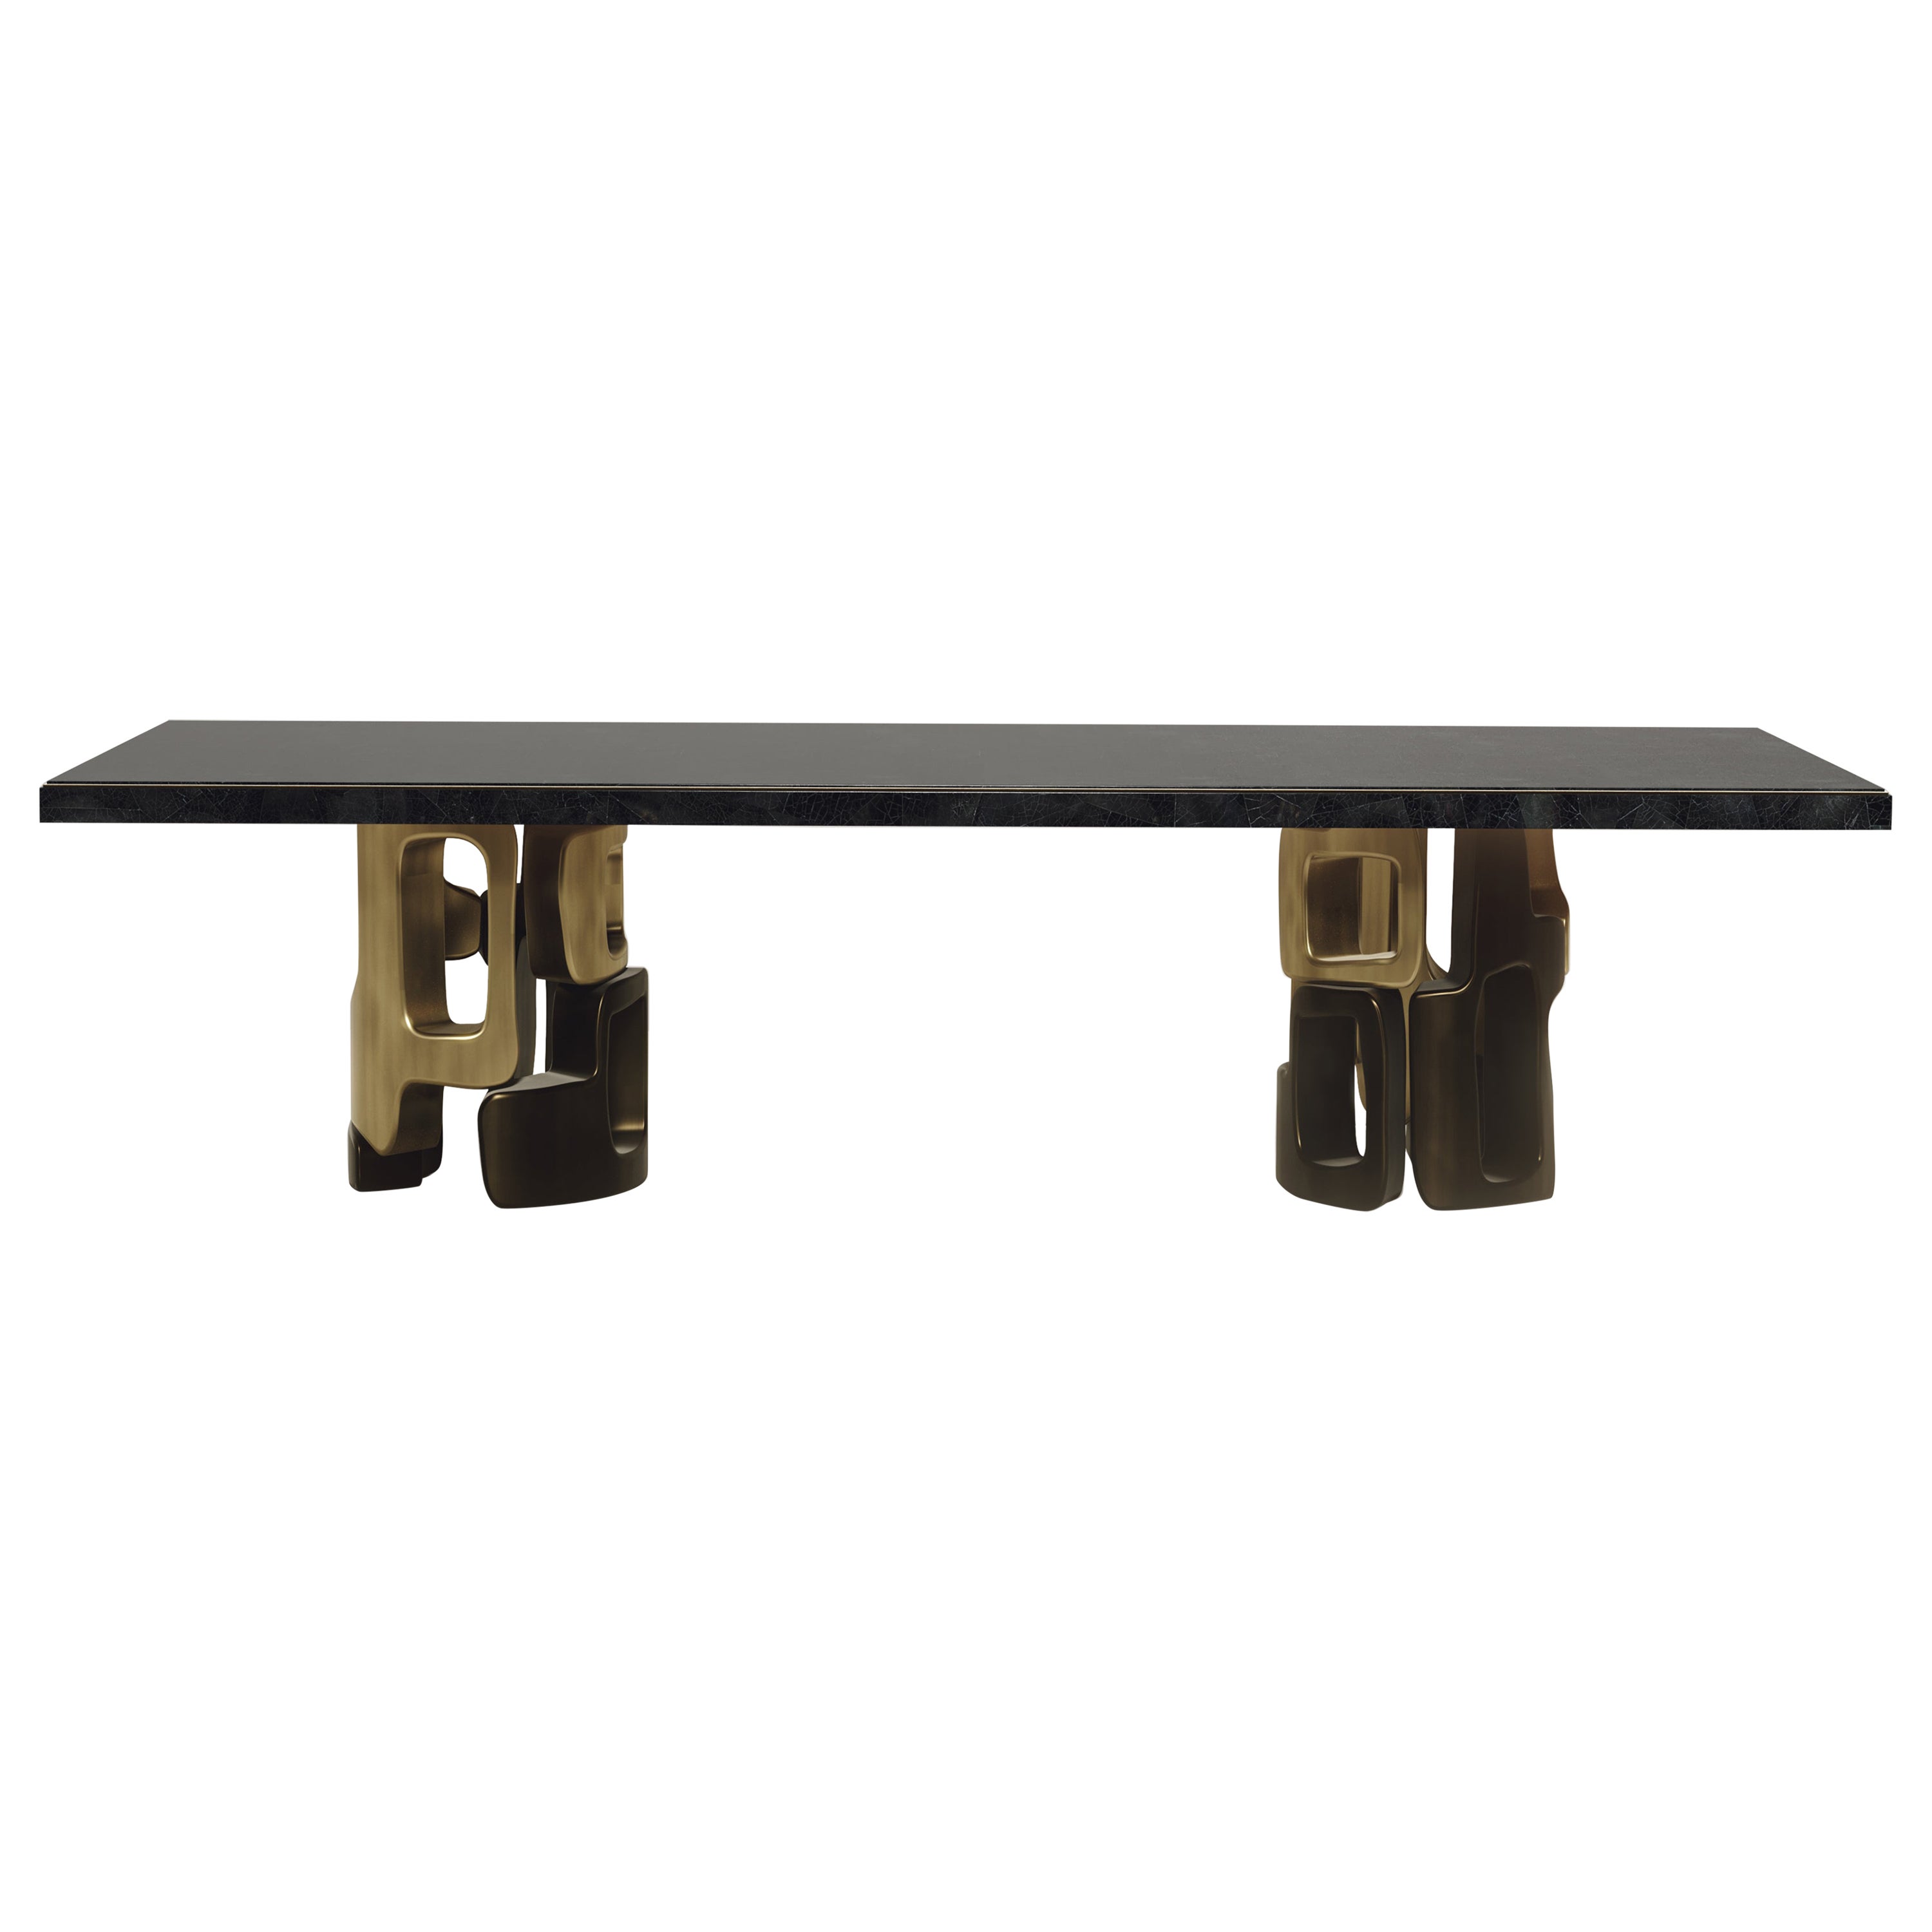 Shell Inlaid Dining Table with Bronze Patina Brass Details by Kifu Paris For Sale